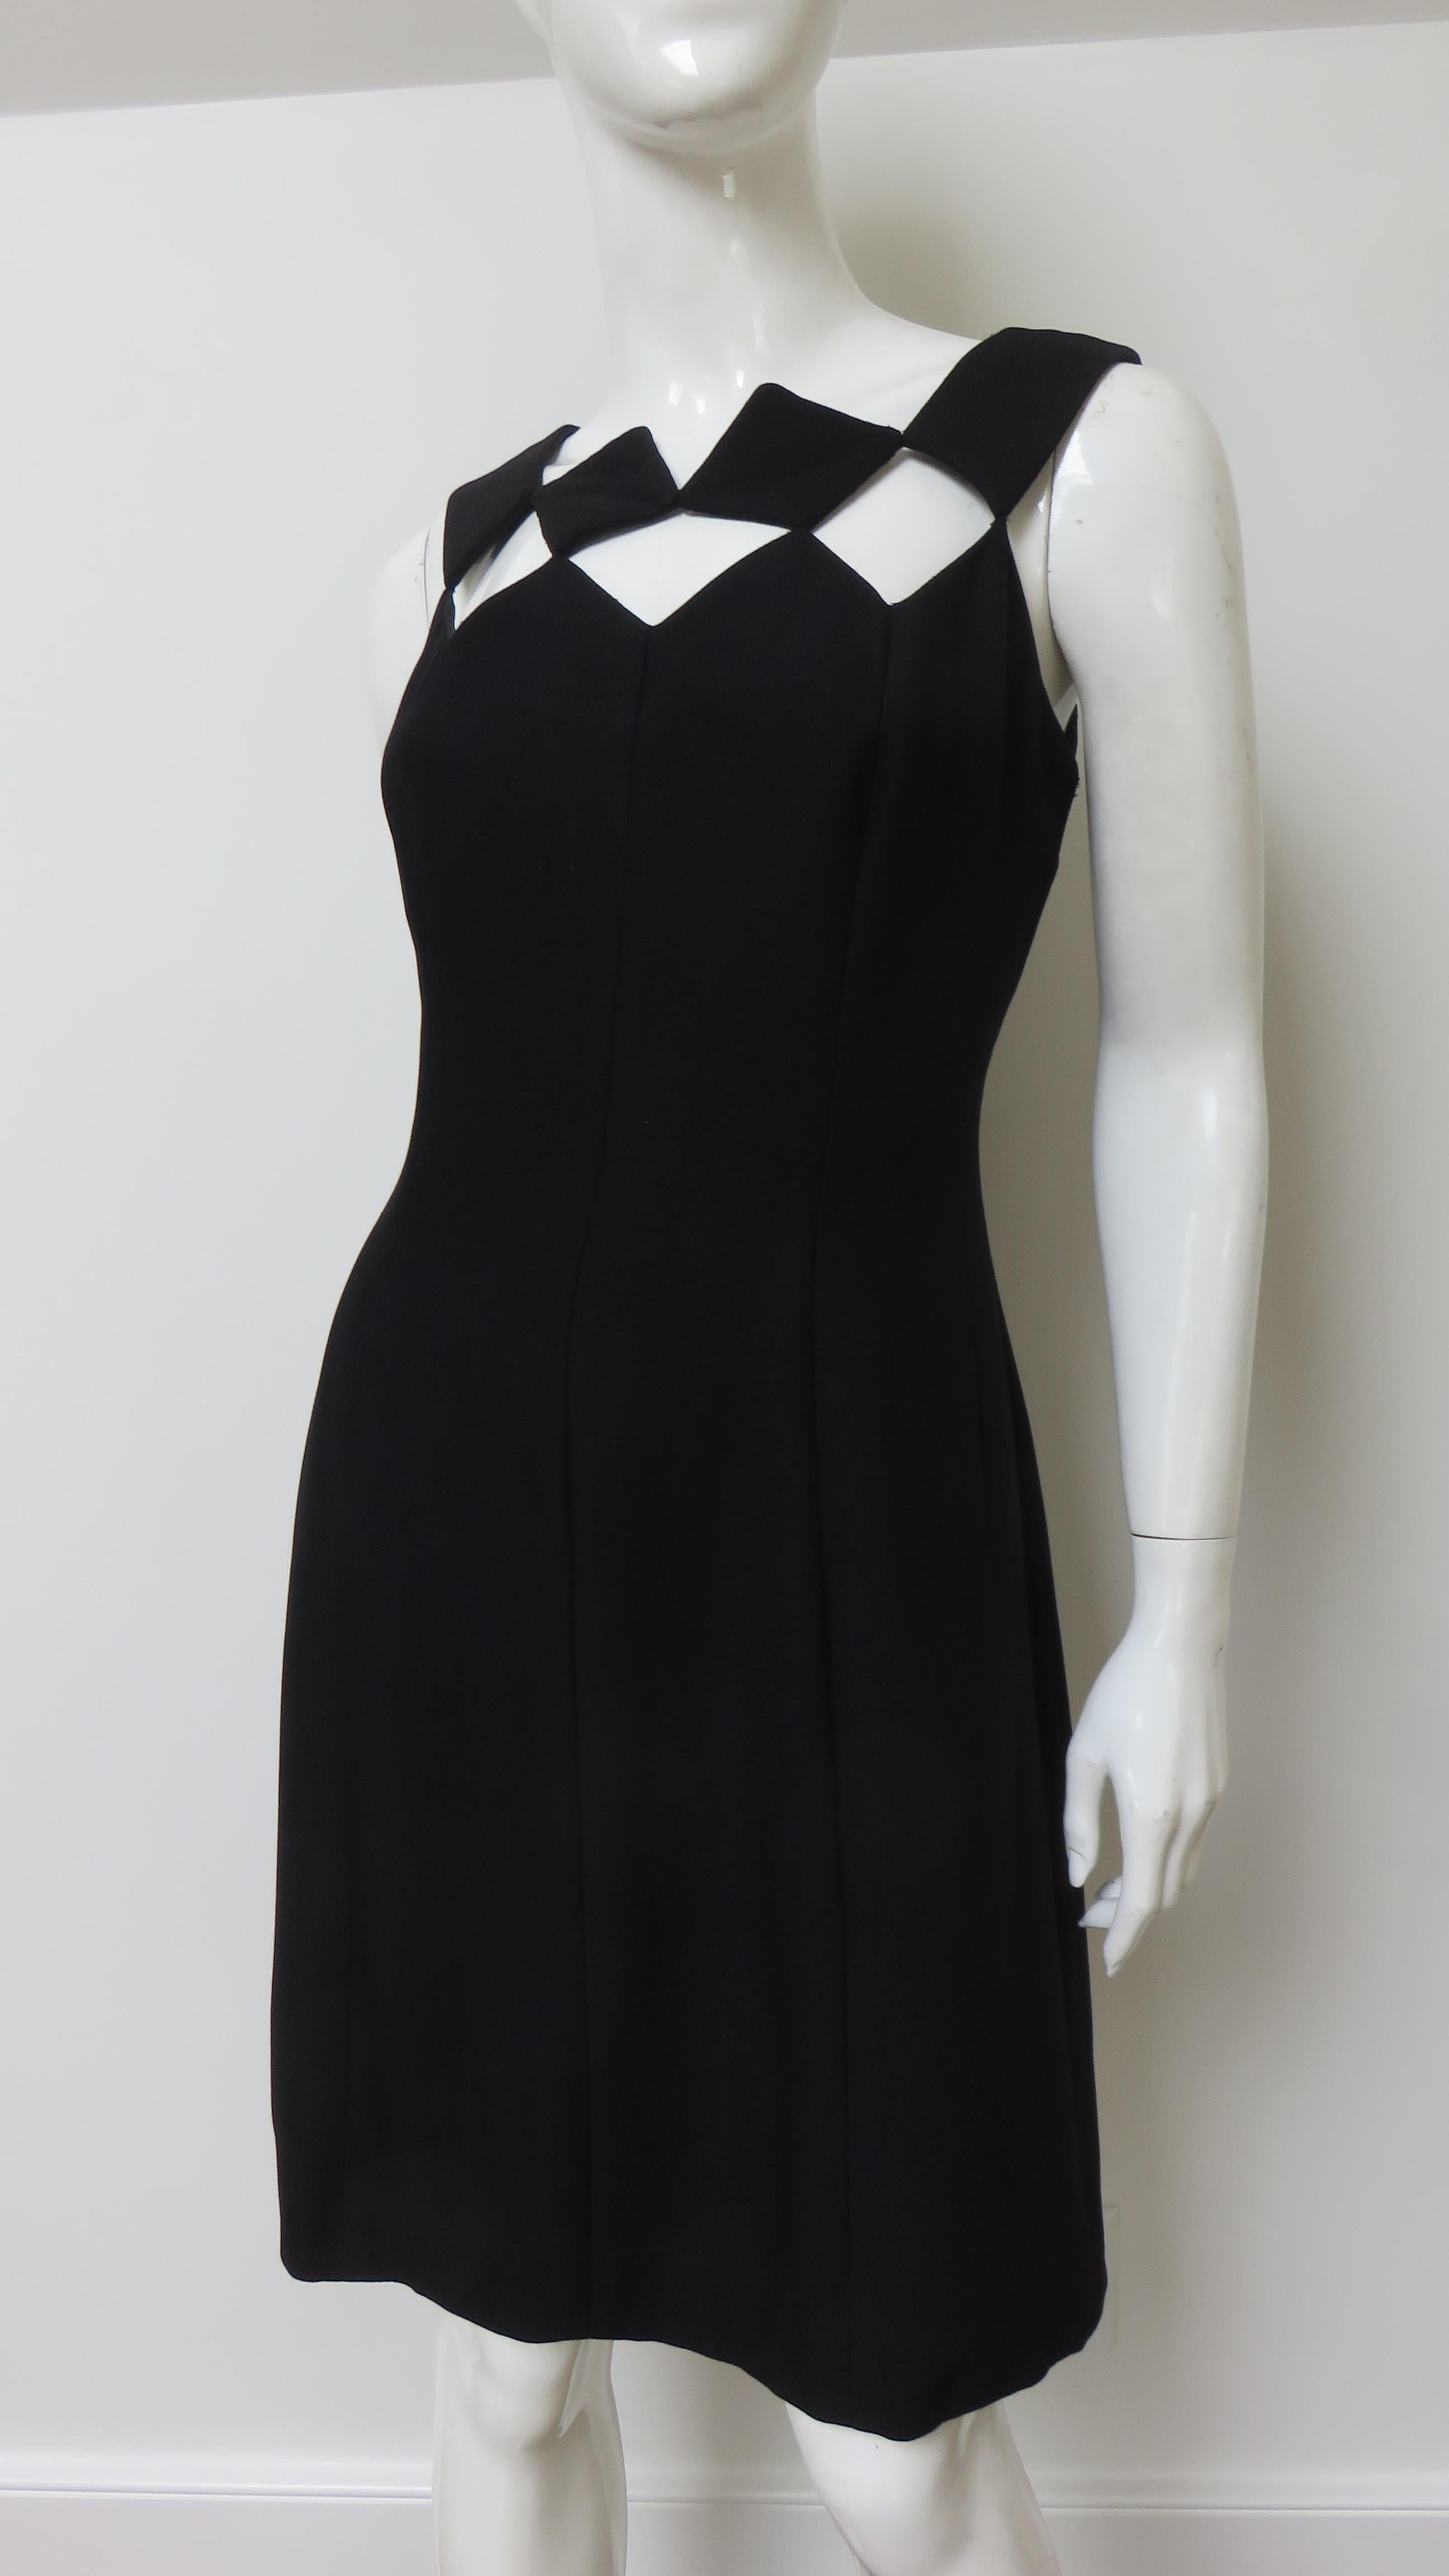 A fabulous little black dress from Louis Estevez.  It is sleeveless with the front and back neckline comprised of fabric squares leaving squares of exposed skin. The dress is a subtle A line fully lined with a back hand sewn zipper.
Fits sizes